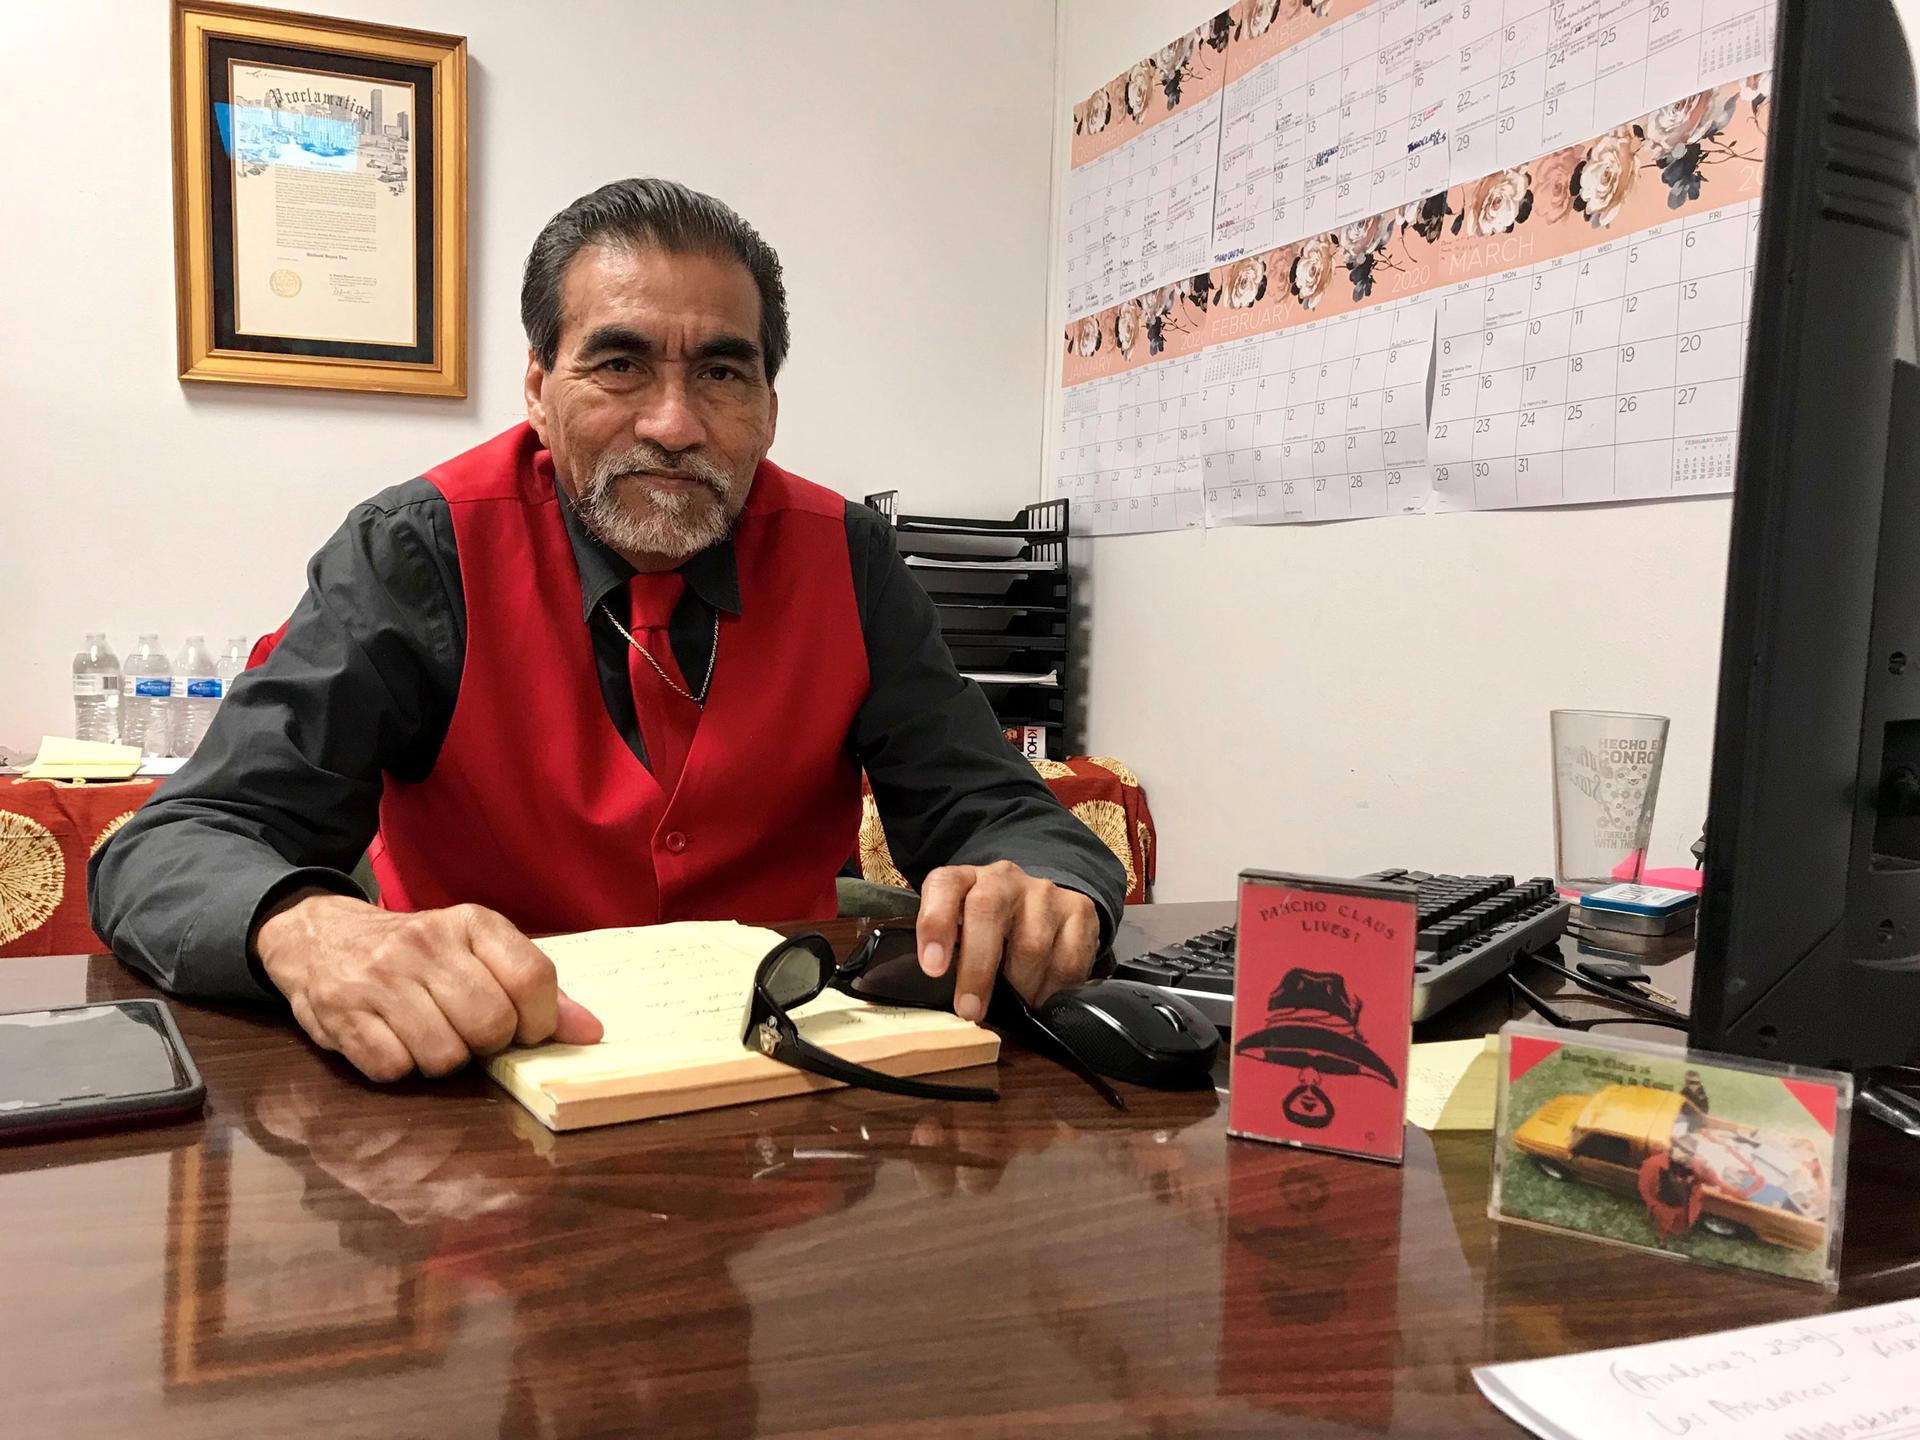 Richard Reyes is shown wearing a red vest and tie while sitting at his desk